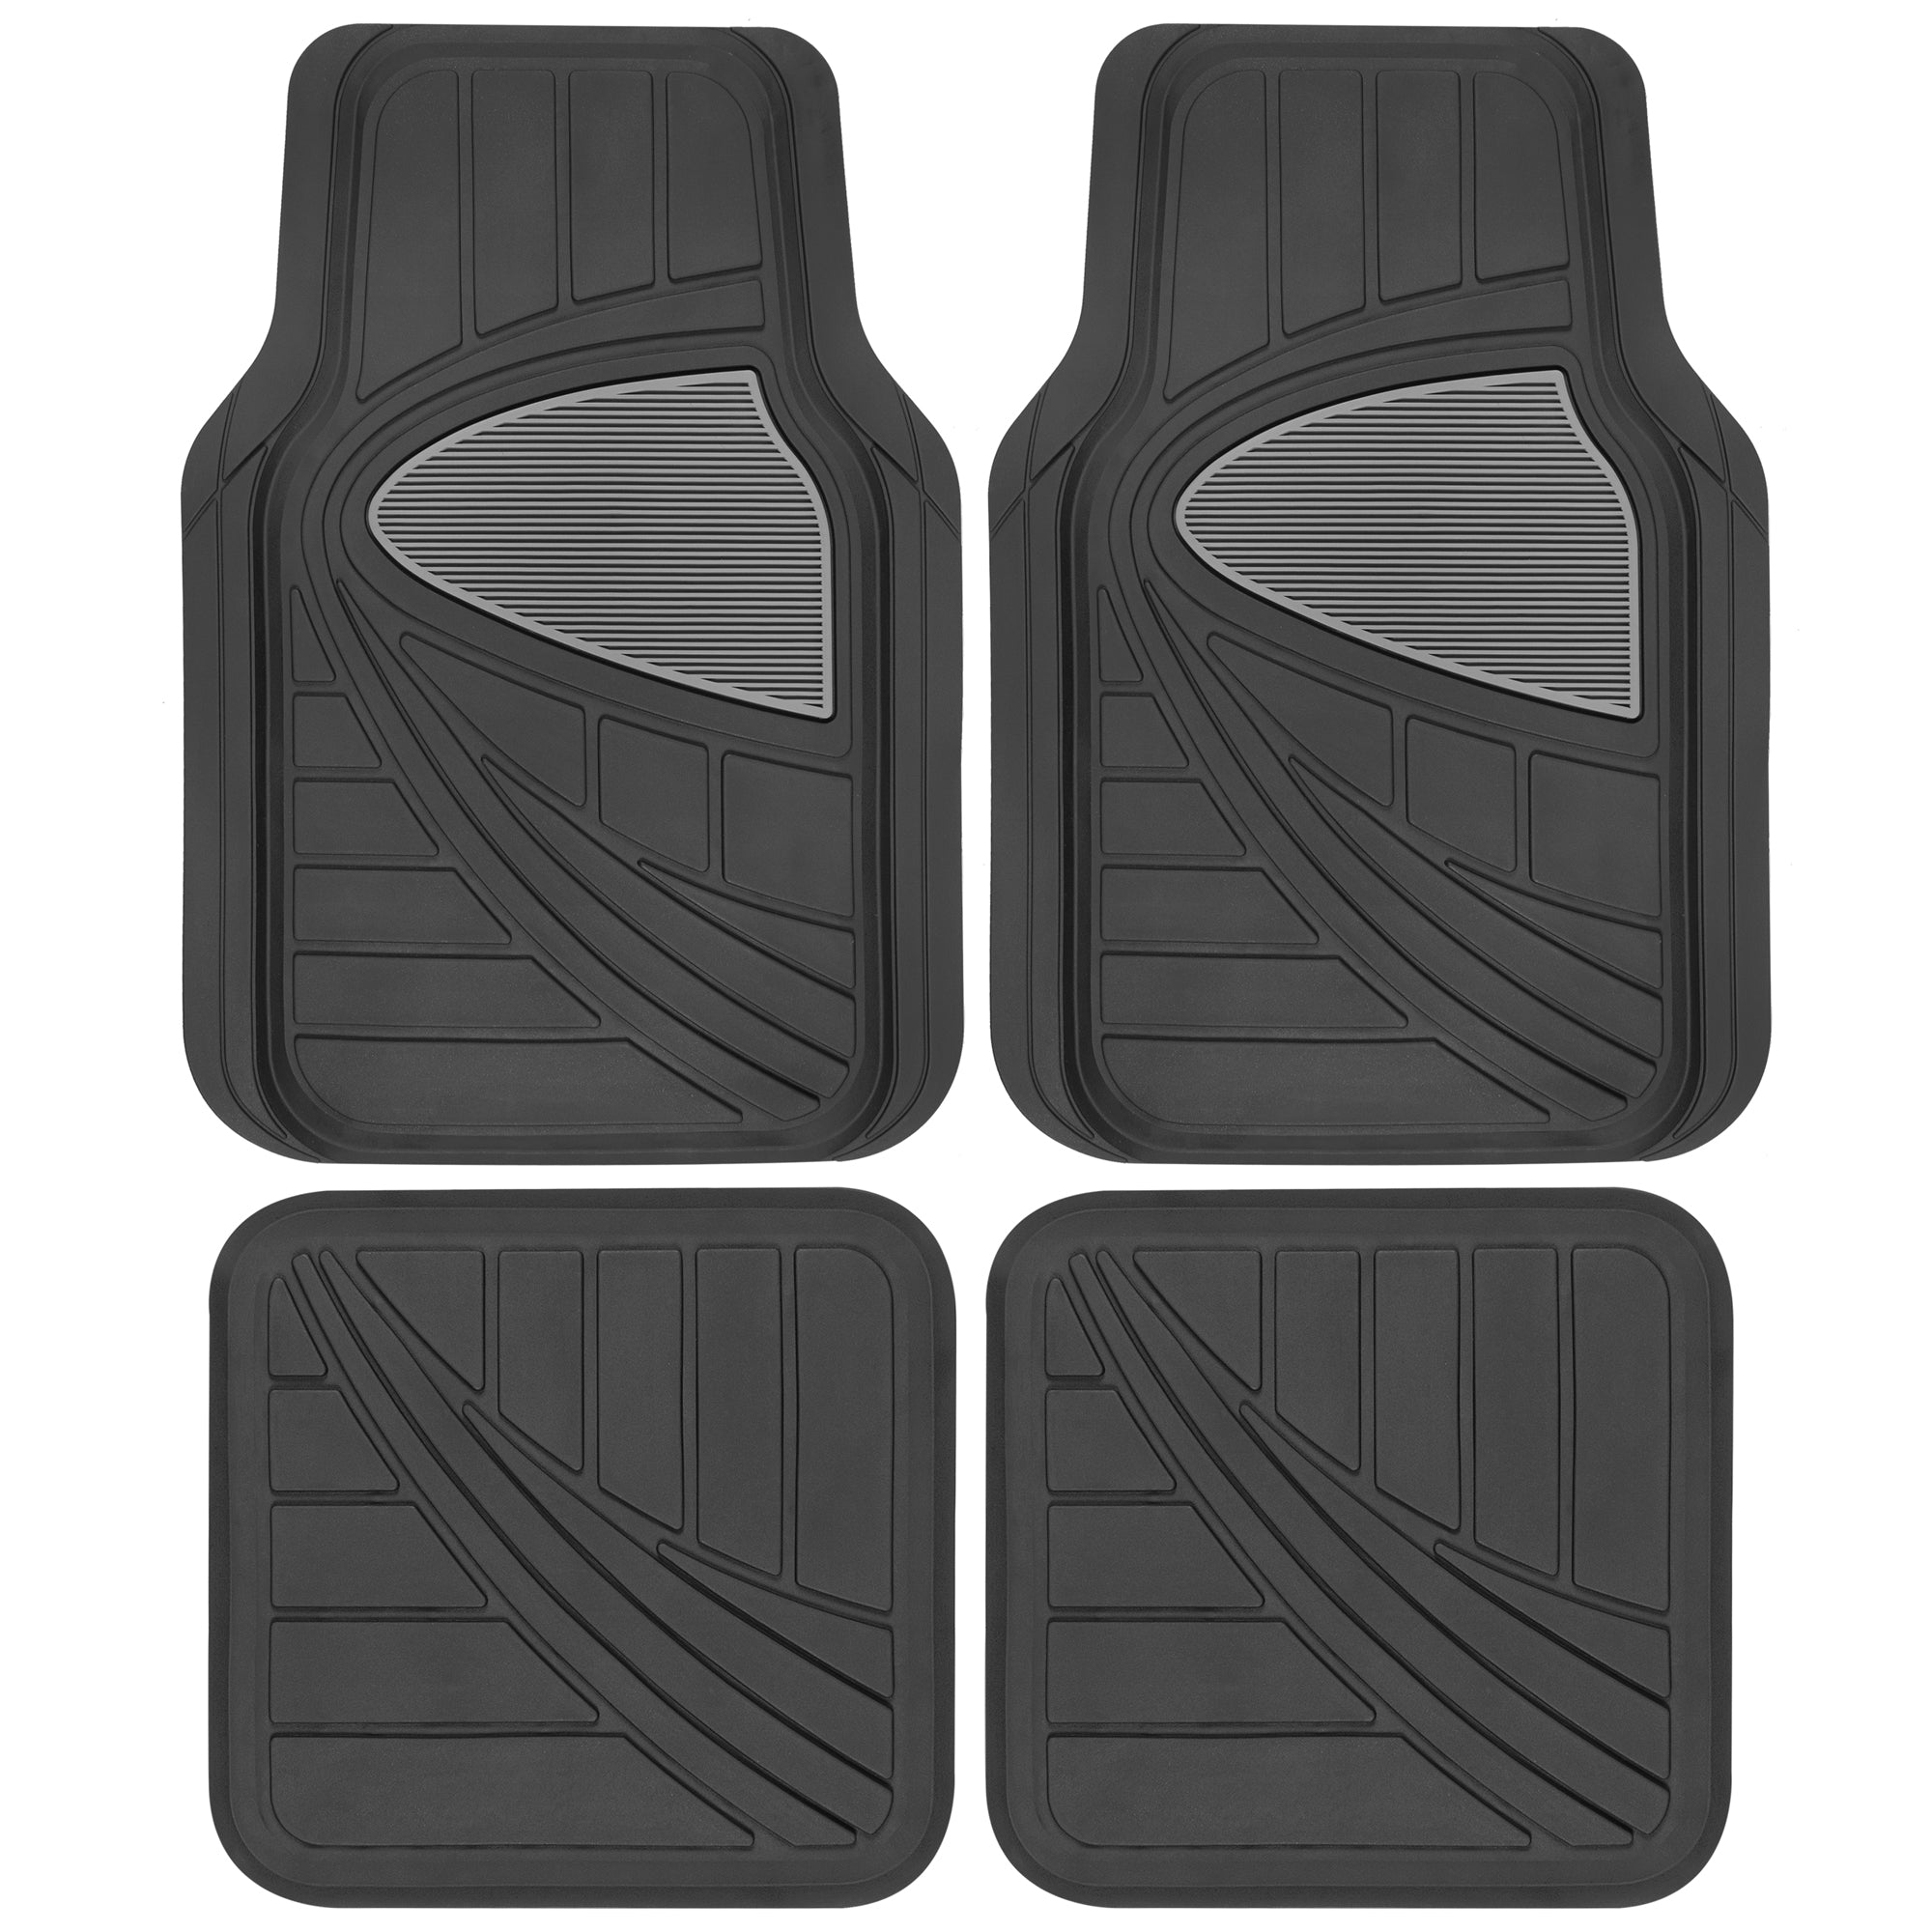 Motor Trend Two-Tone Focus Rubber Car Floor Mats for Autos SUV Truck & Van - All-Weather Waterproof Protection Front & Rear Liners, Trim to Fit Most Vehicles